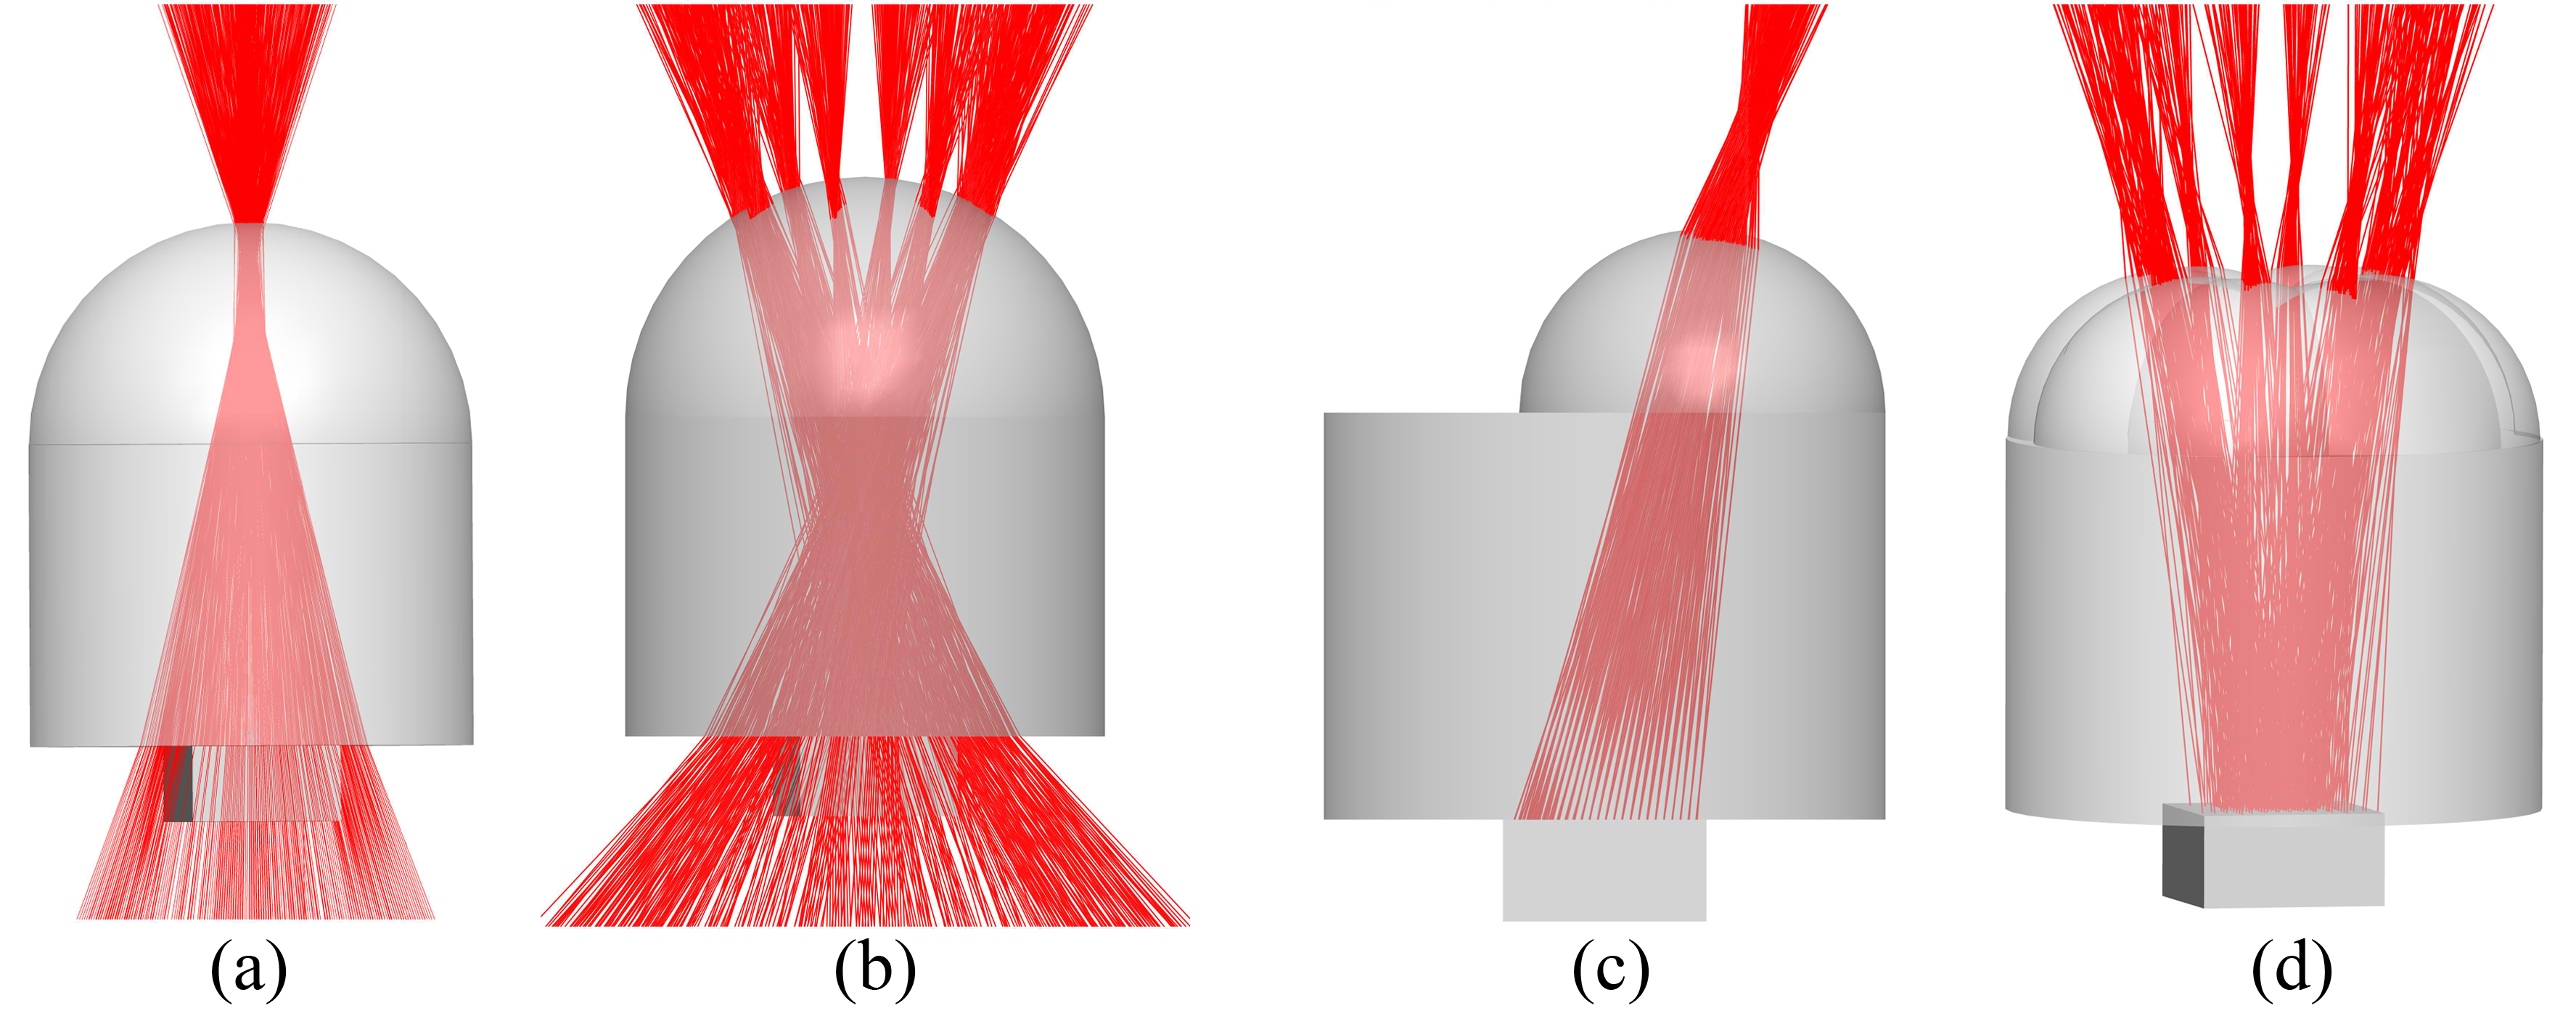 Ray-tracing of the SOE using domed shape lens, which shows nonuniform distribution of rays, for the (a) normal Fresnel lens (b) eight-fold Fresnel lens and spherical lens, which gives uniform distribution of rays for the eight-fold Fresnel lens, (c) single lens (d) eight lenses.